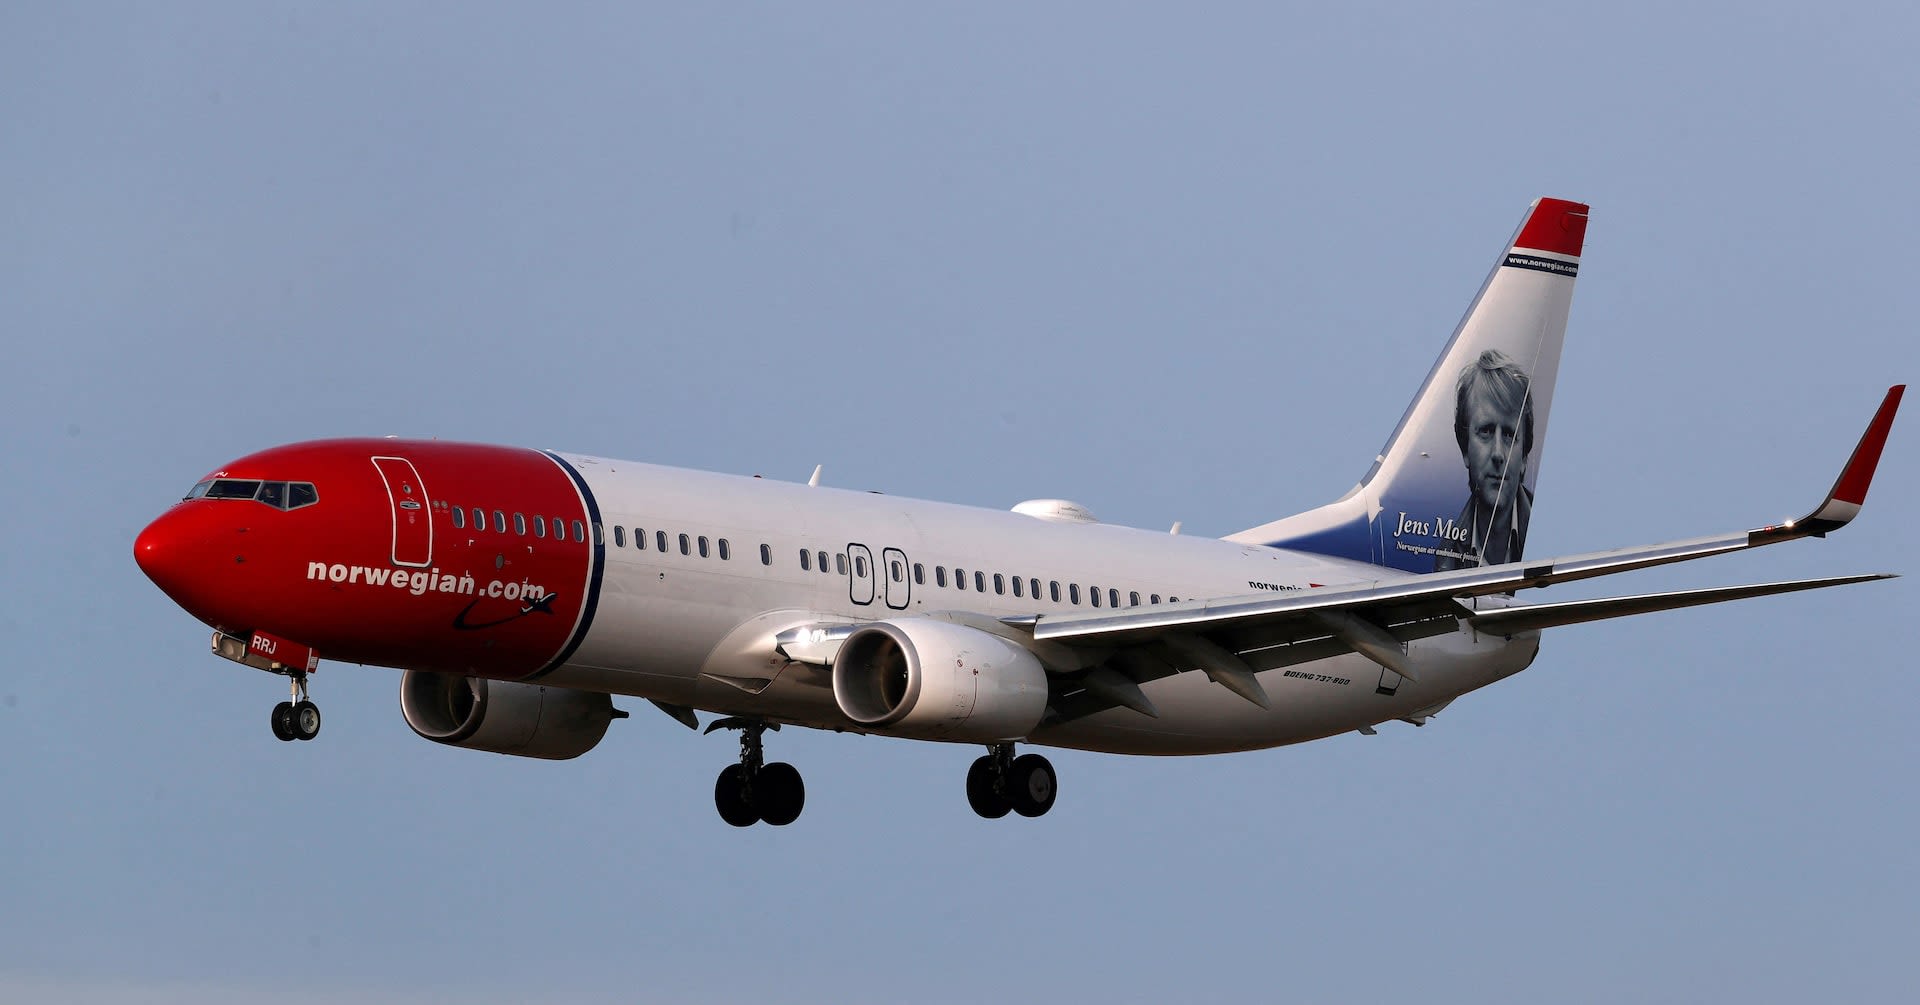 Norwegian Air reaches wage deal with pilots, averting strike